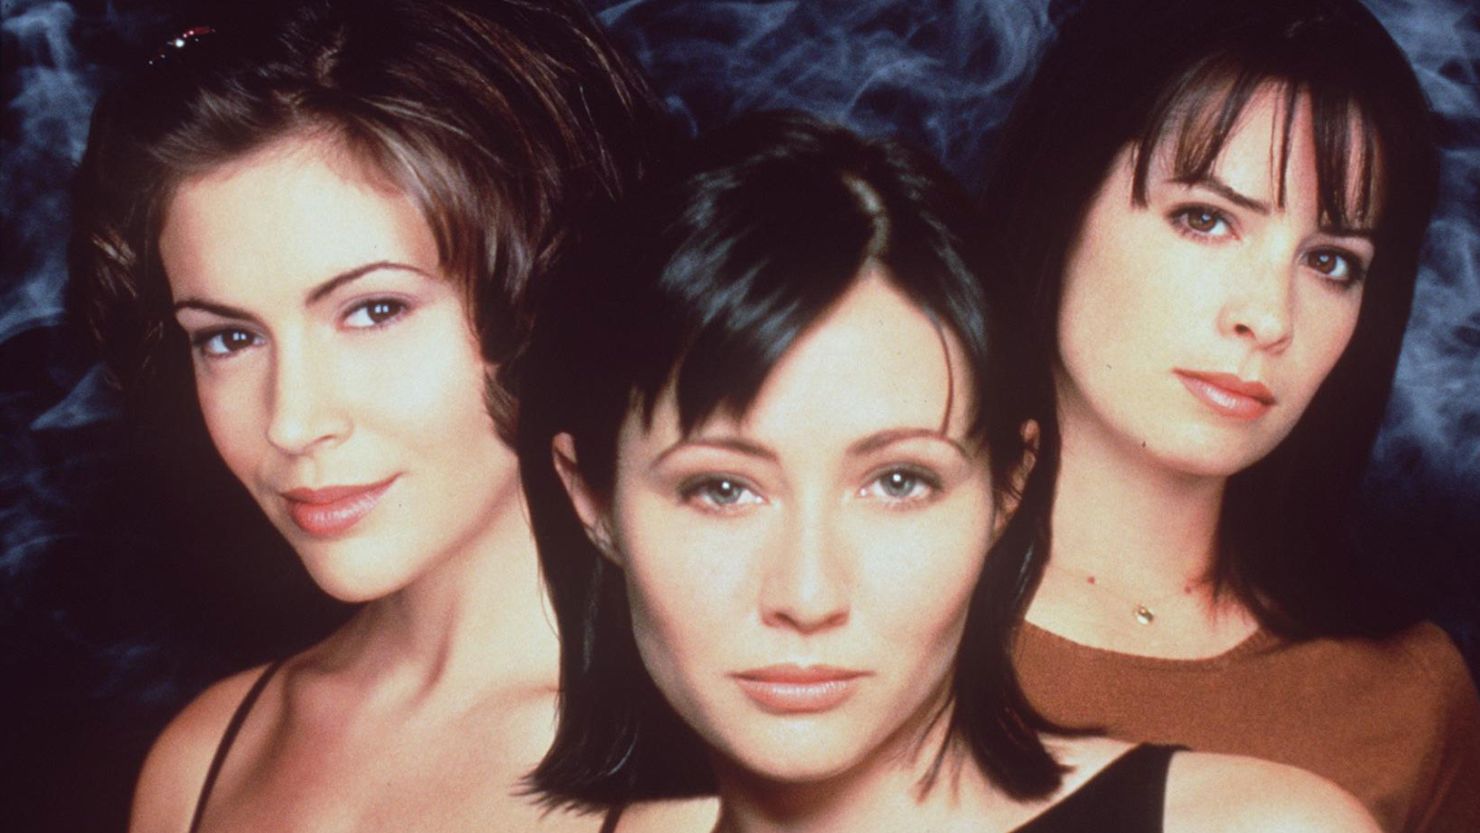 The Cast Of "Charmed." From L-R: Alyssa Milano As Phoebe Halliwell, Shannen Doherty As Prue Halliwell And Holly Marie Combs As Piper Halliwell. (Photo By Getty Images)